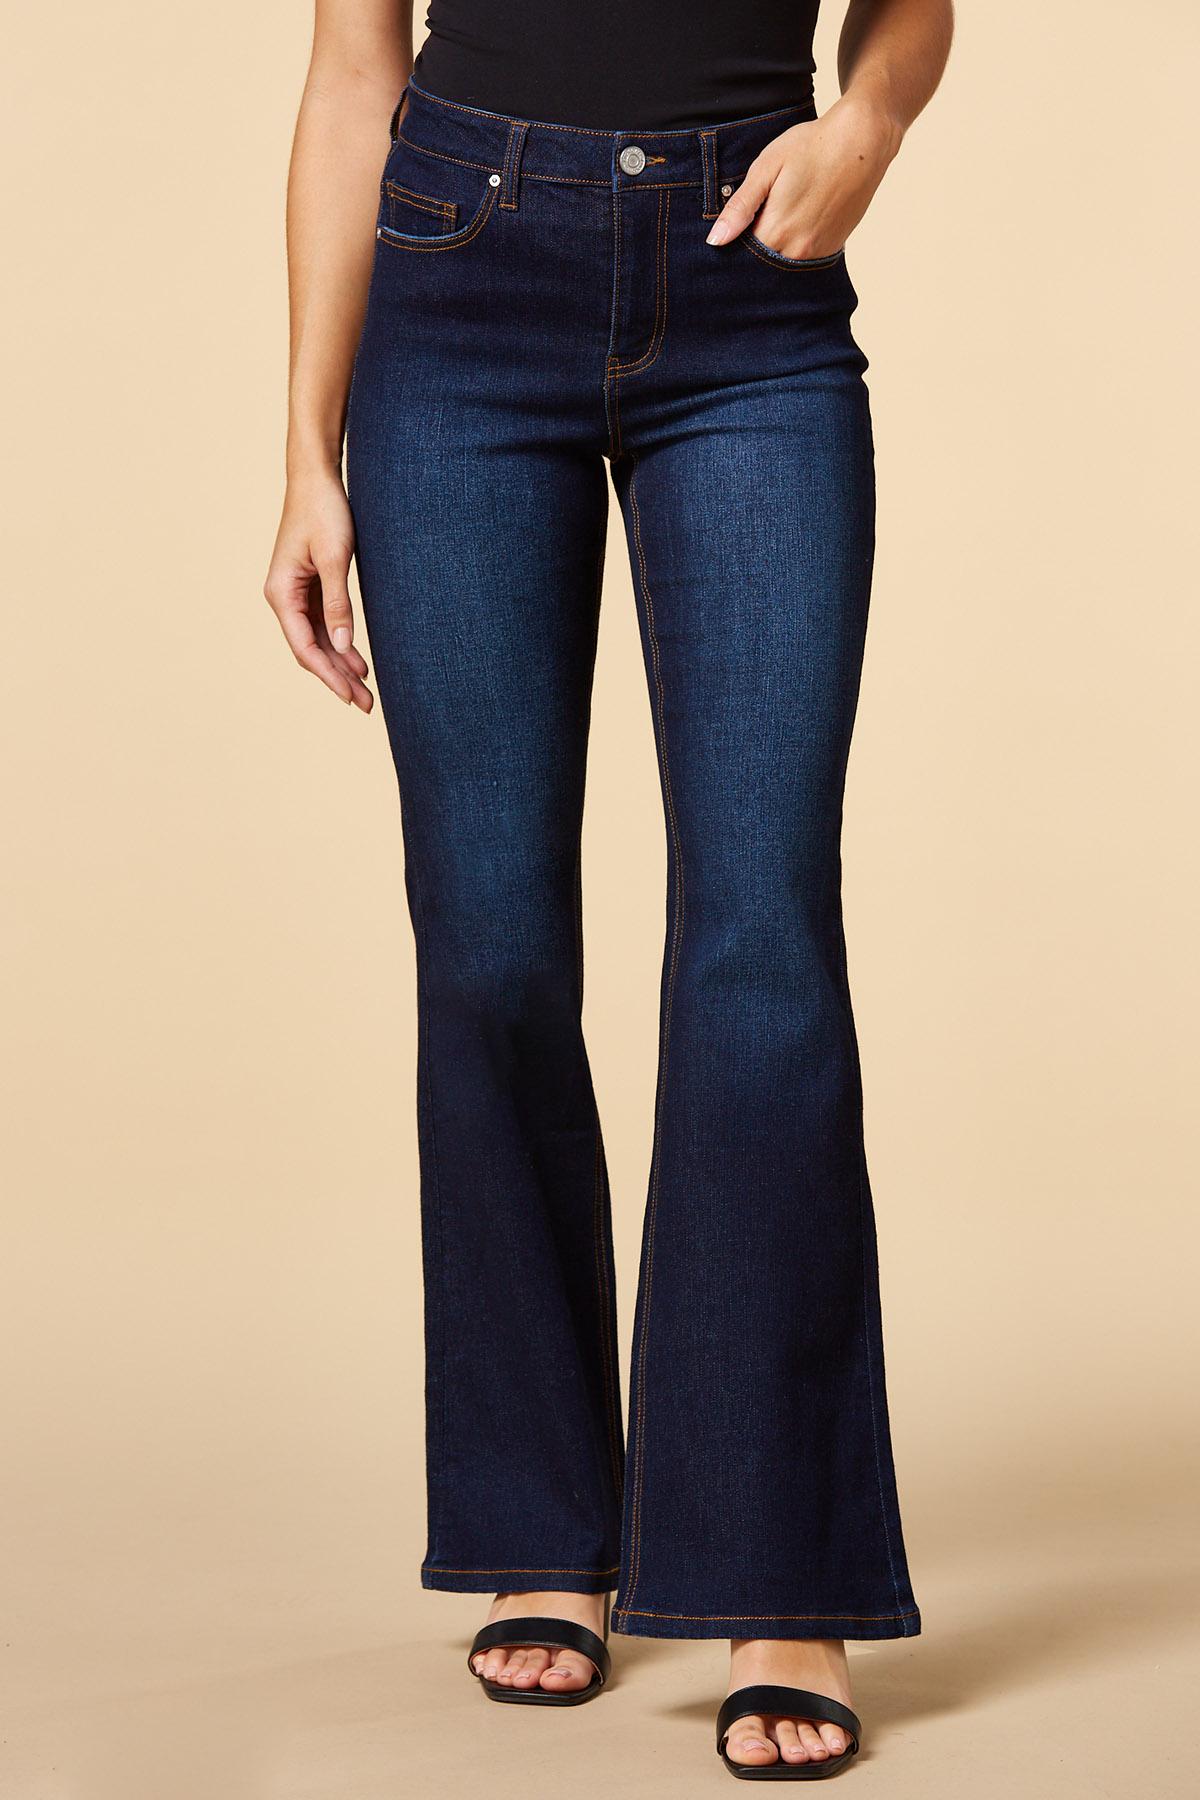 Versona | casual friday jeans